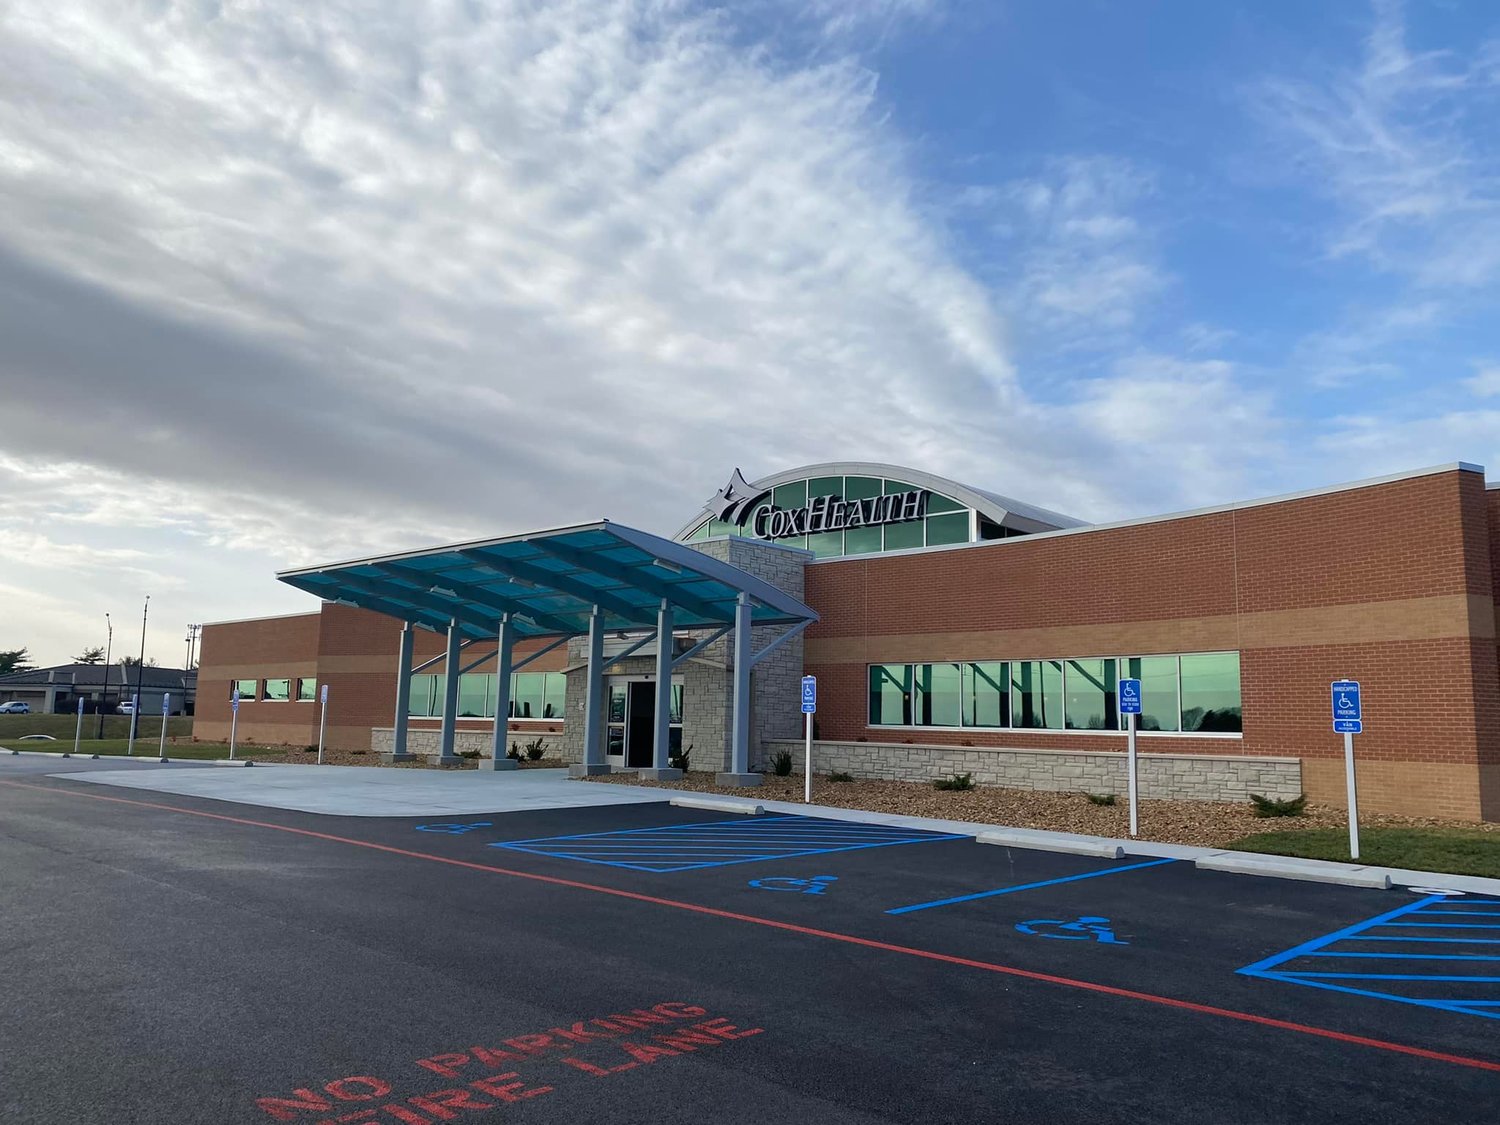 The CoxHealth East Battlefield Clinic spans 30,000 square feet.